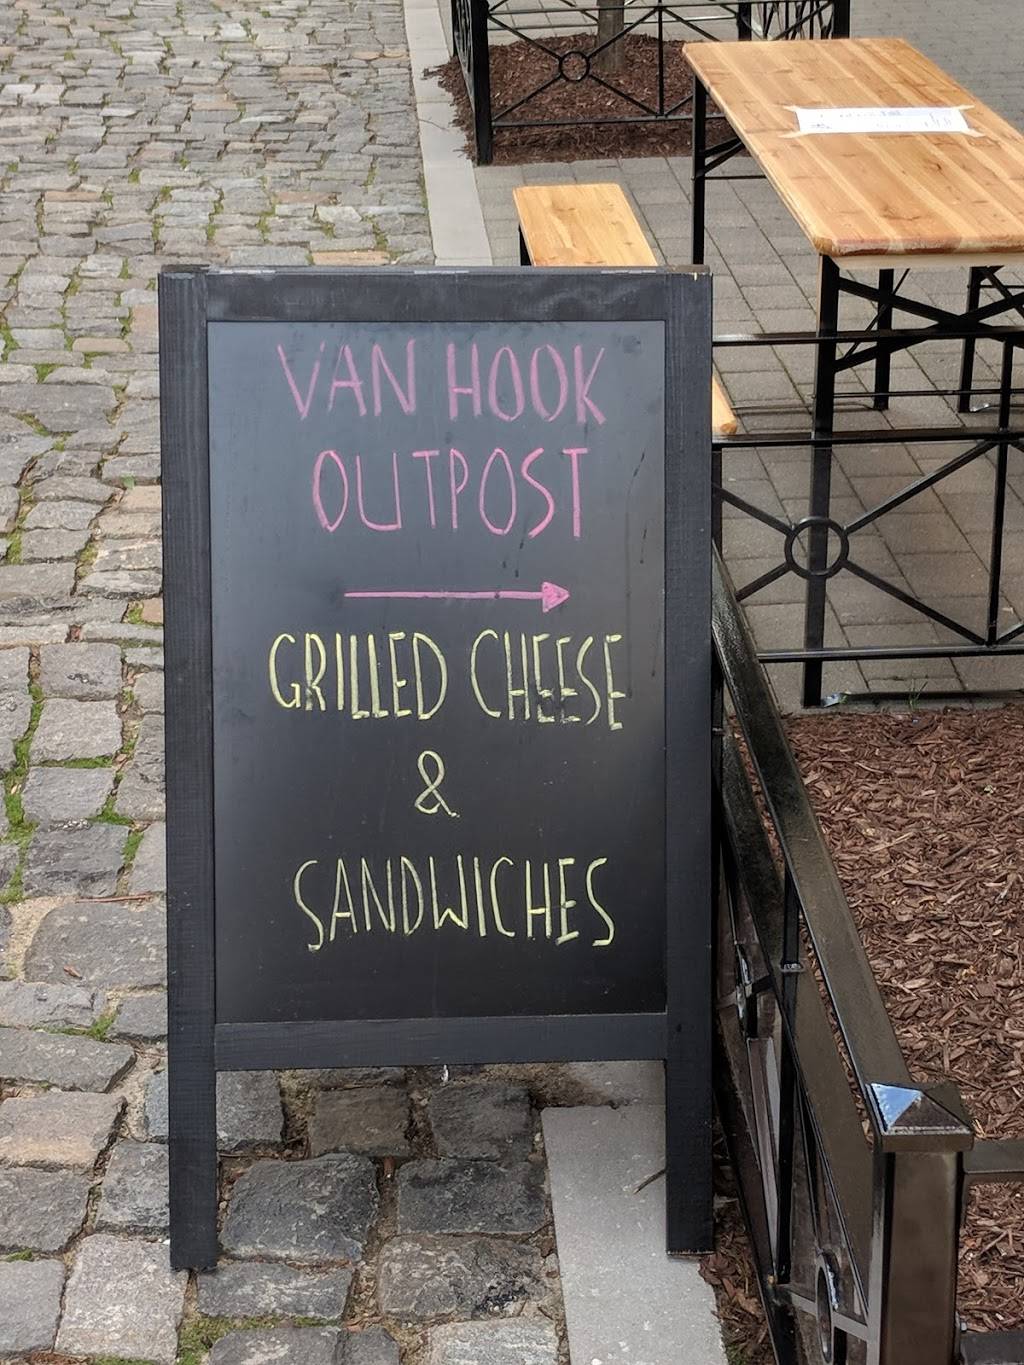 Van Hook Outpost | restaurant | 232 Pavonia Ave, Jersey City, NJ 07302, USA | 2014332600 OR +1 201-433-2600